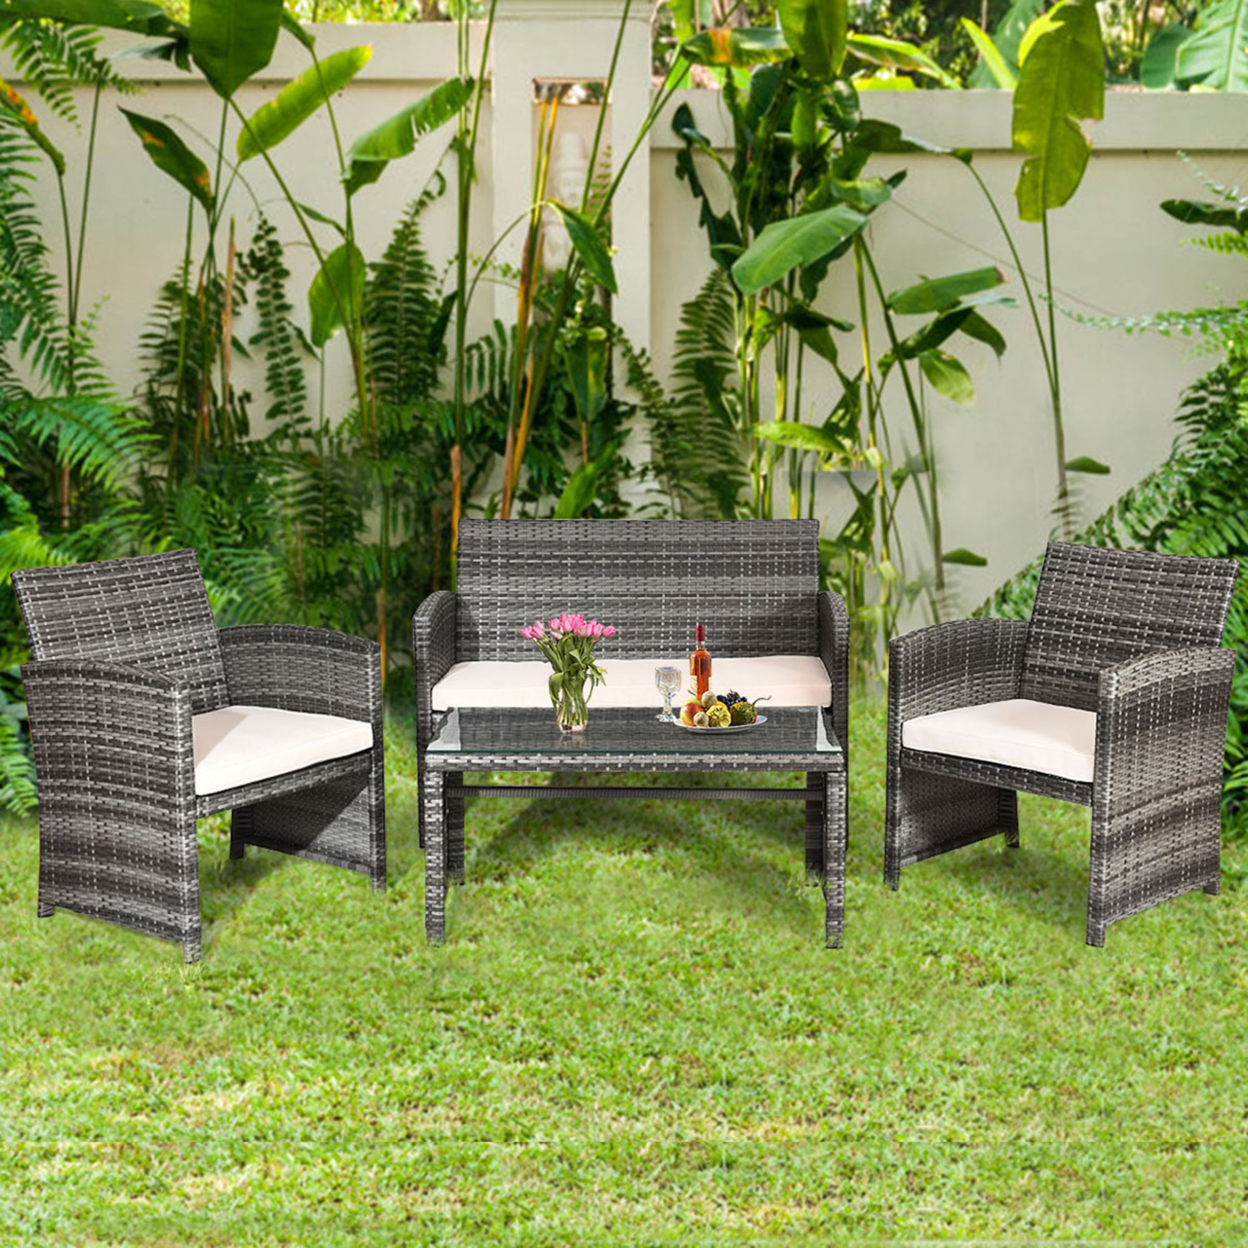 4PCS Patio Outdoor Rattan Furniture Set Chair Loveseat Table Cushioned